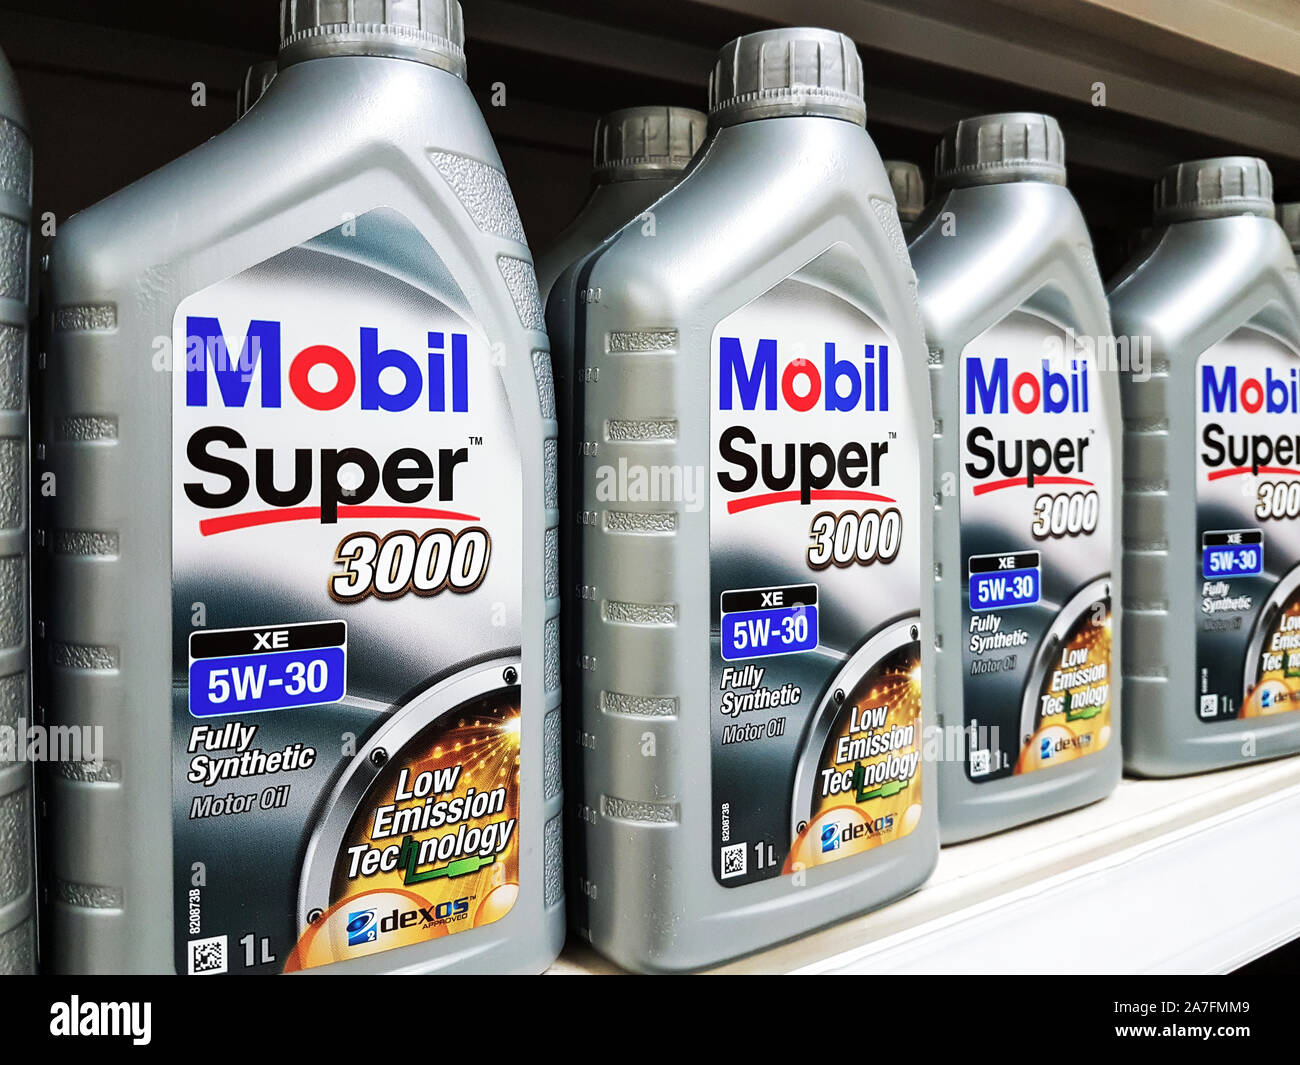 Nowy Sacz, Poland - November 03, 2018 : Mobile Super Oil product displayed at supermarket for sale. ExxonMobil is a major American oil company. Stock Photo